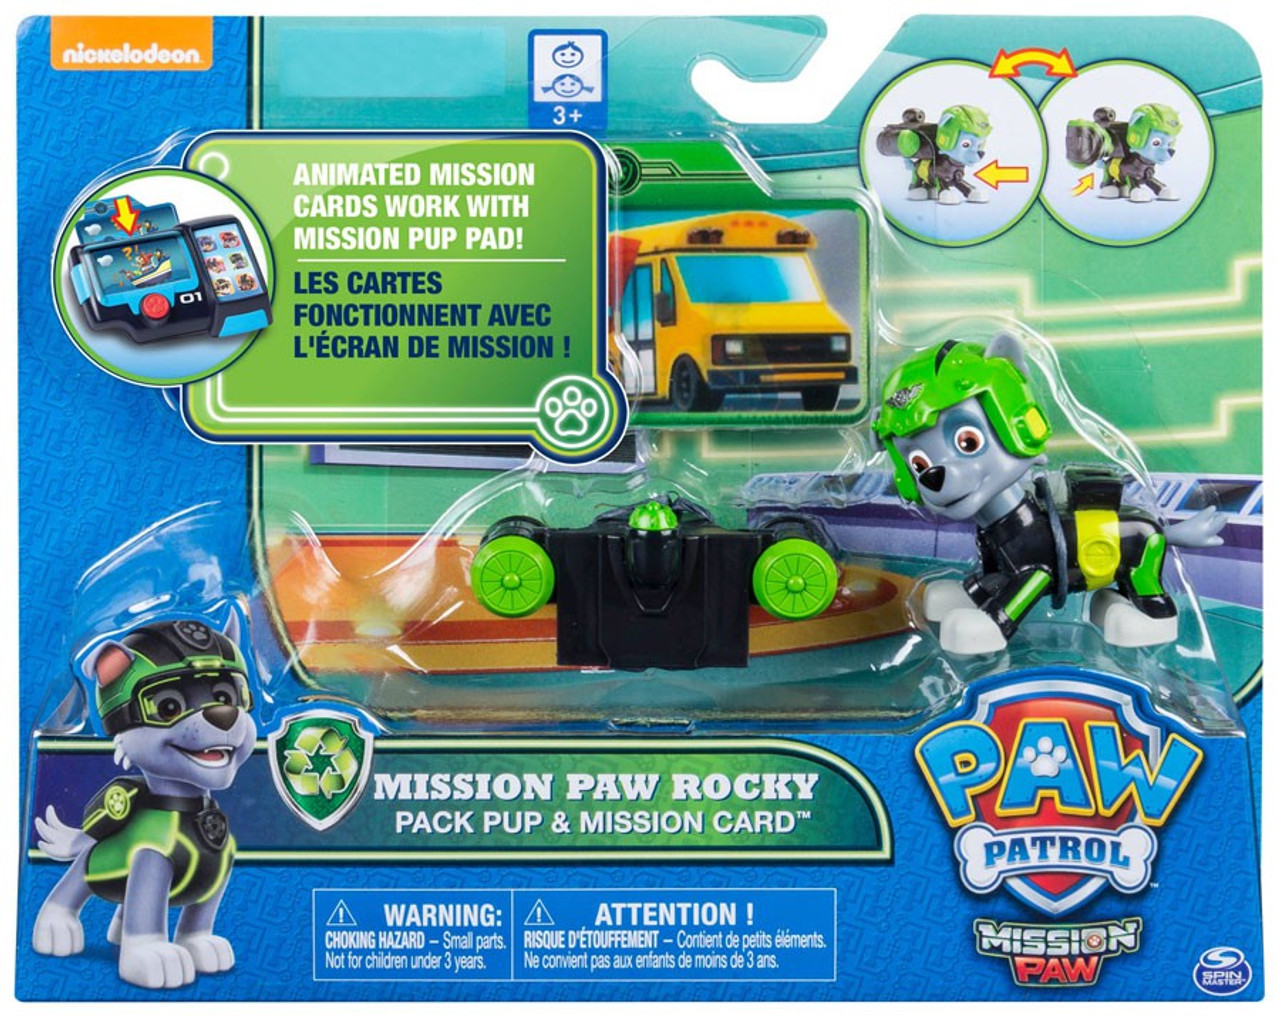 Paw Patrol Mission Paw Pack Pup Mission Card Mission Paw Rocky Exclusive Figure Spin Master